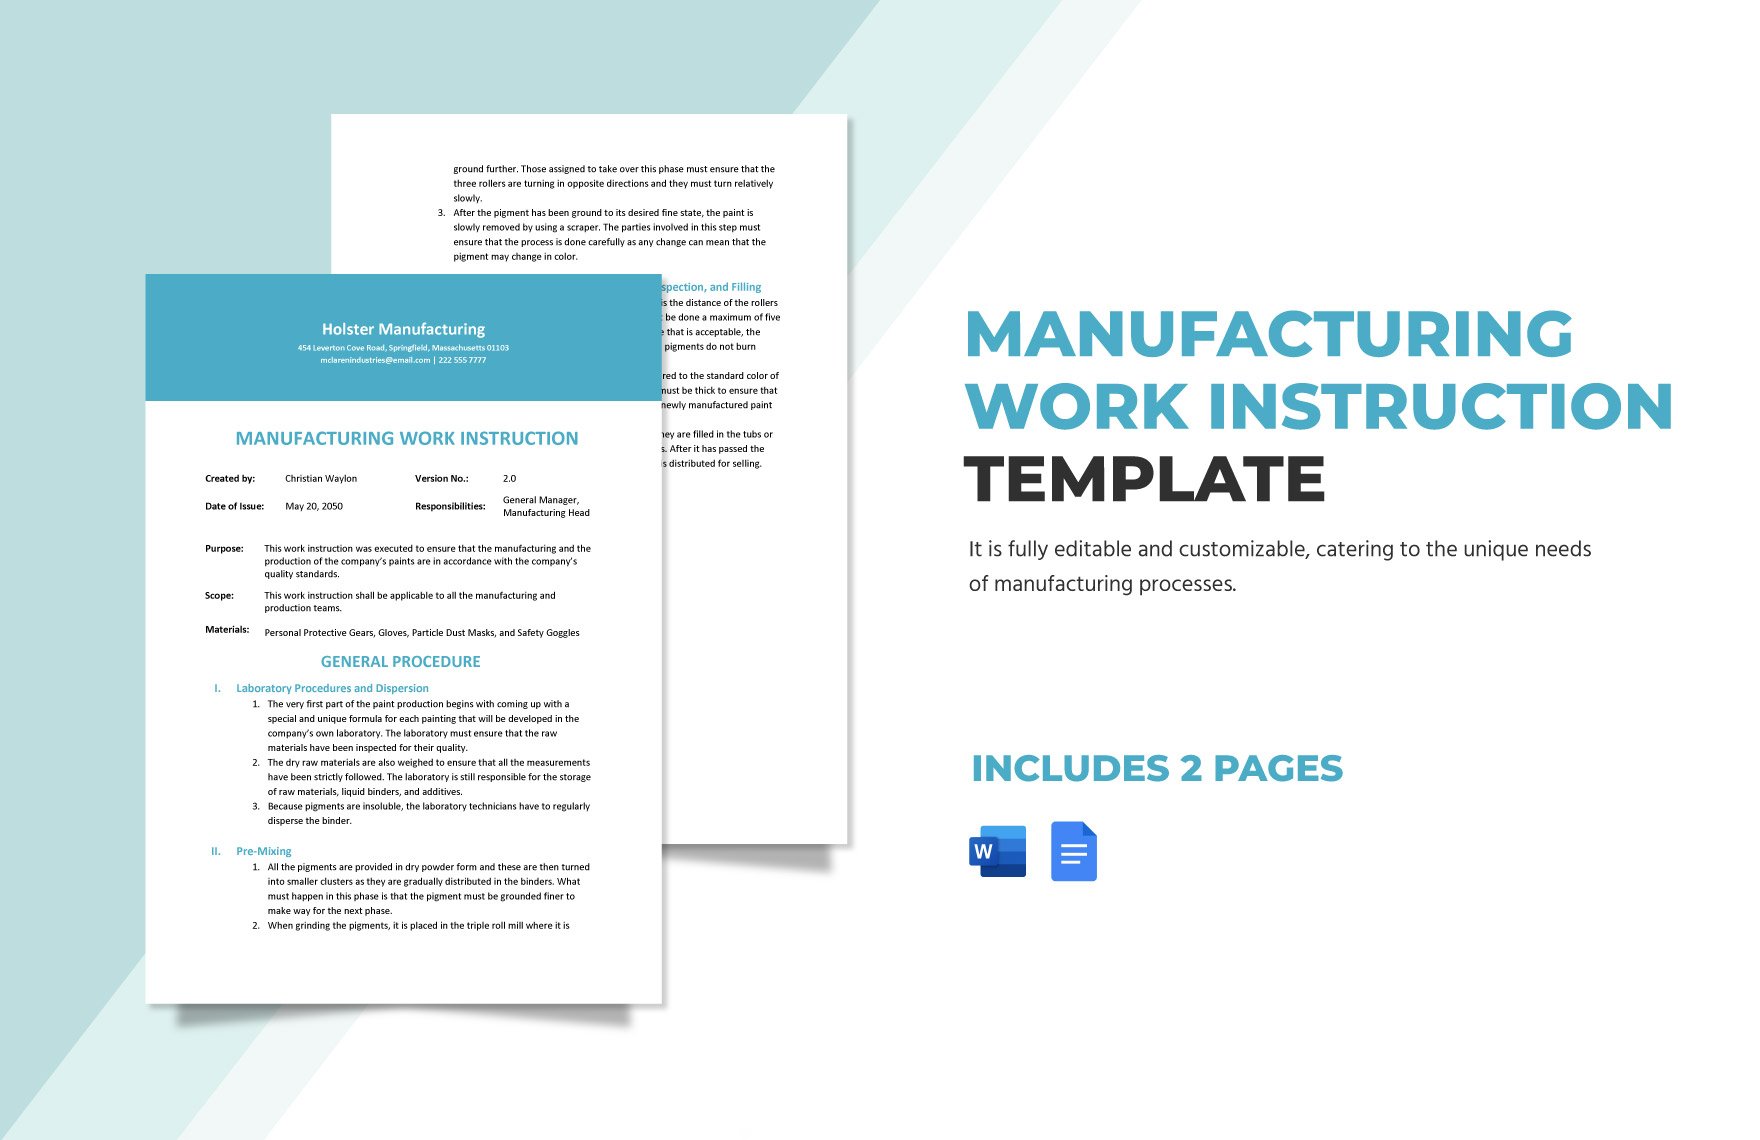 Manufacturing Work Instruction Template